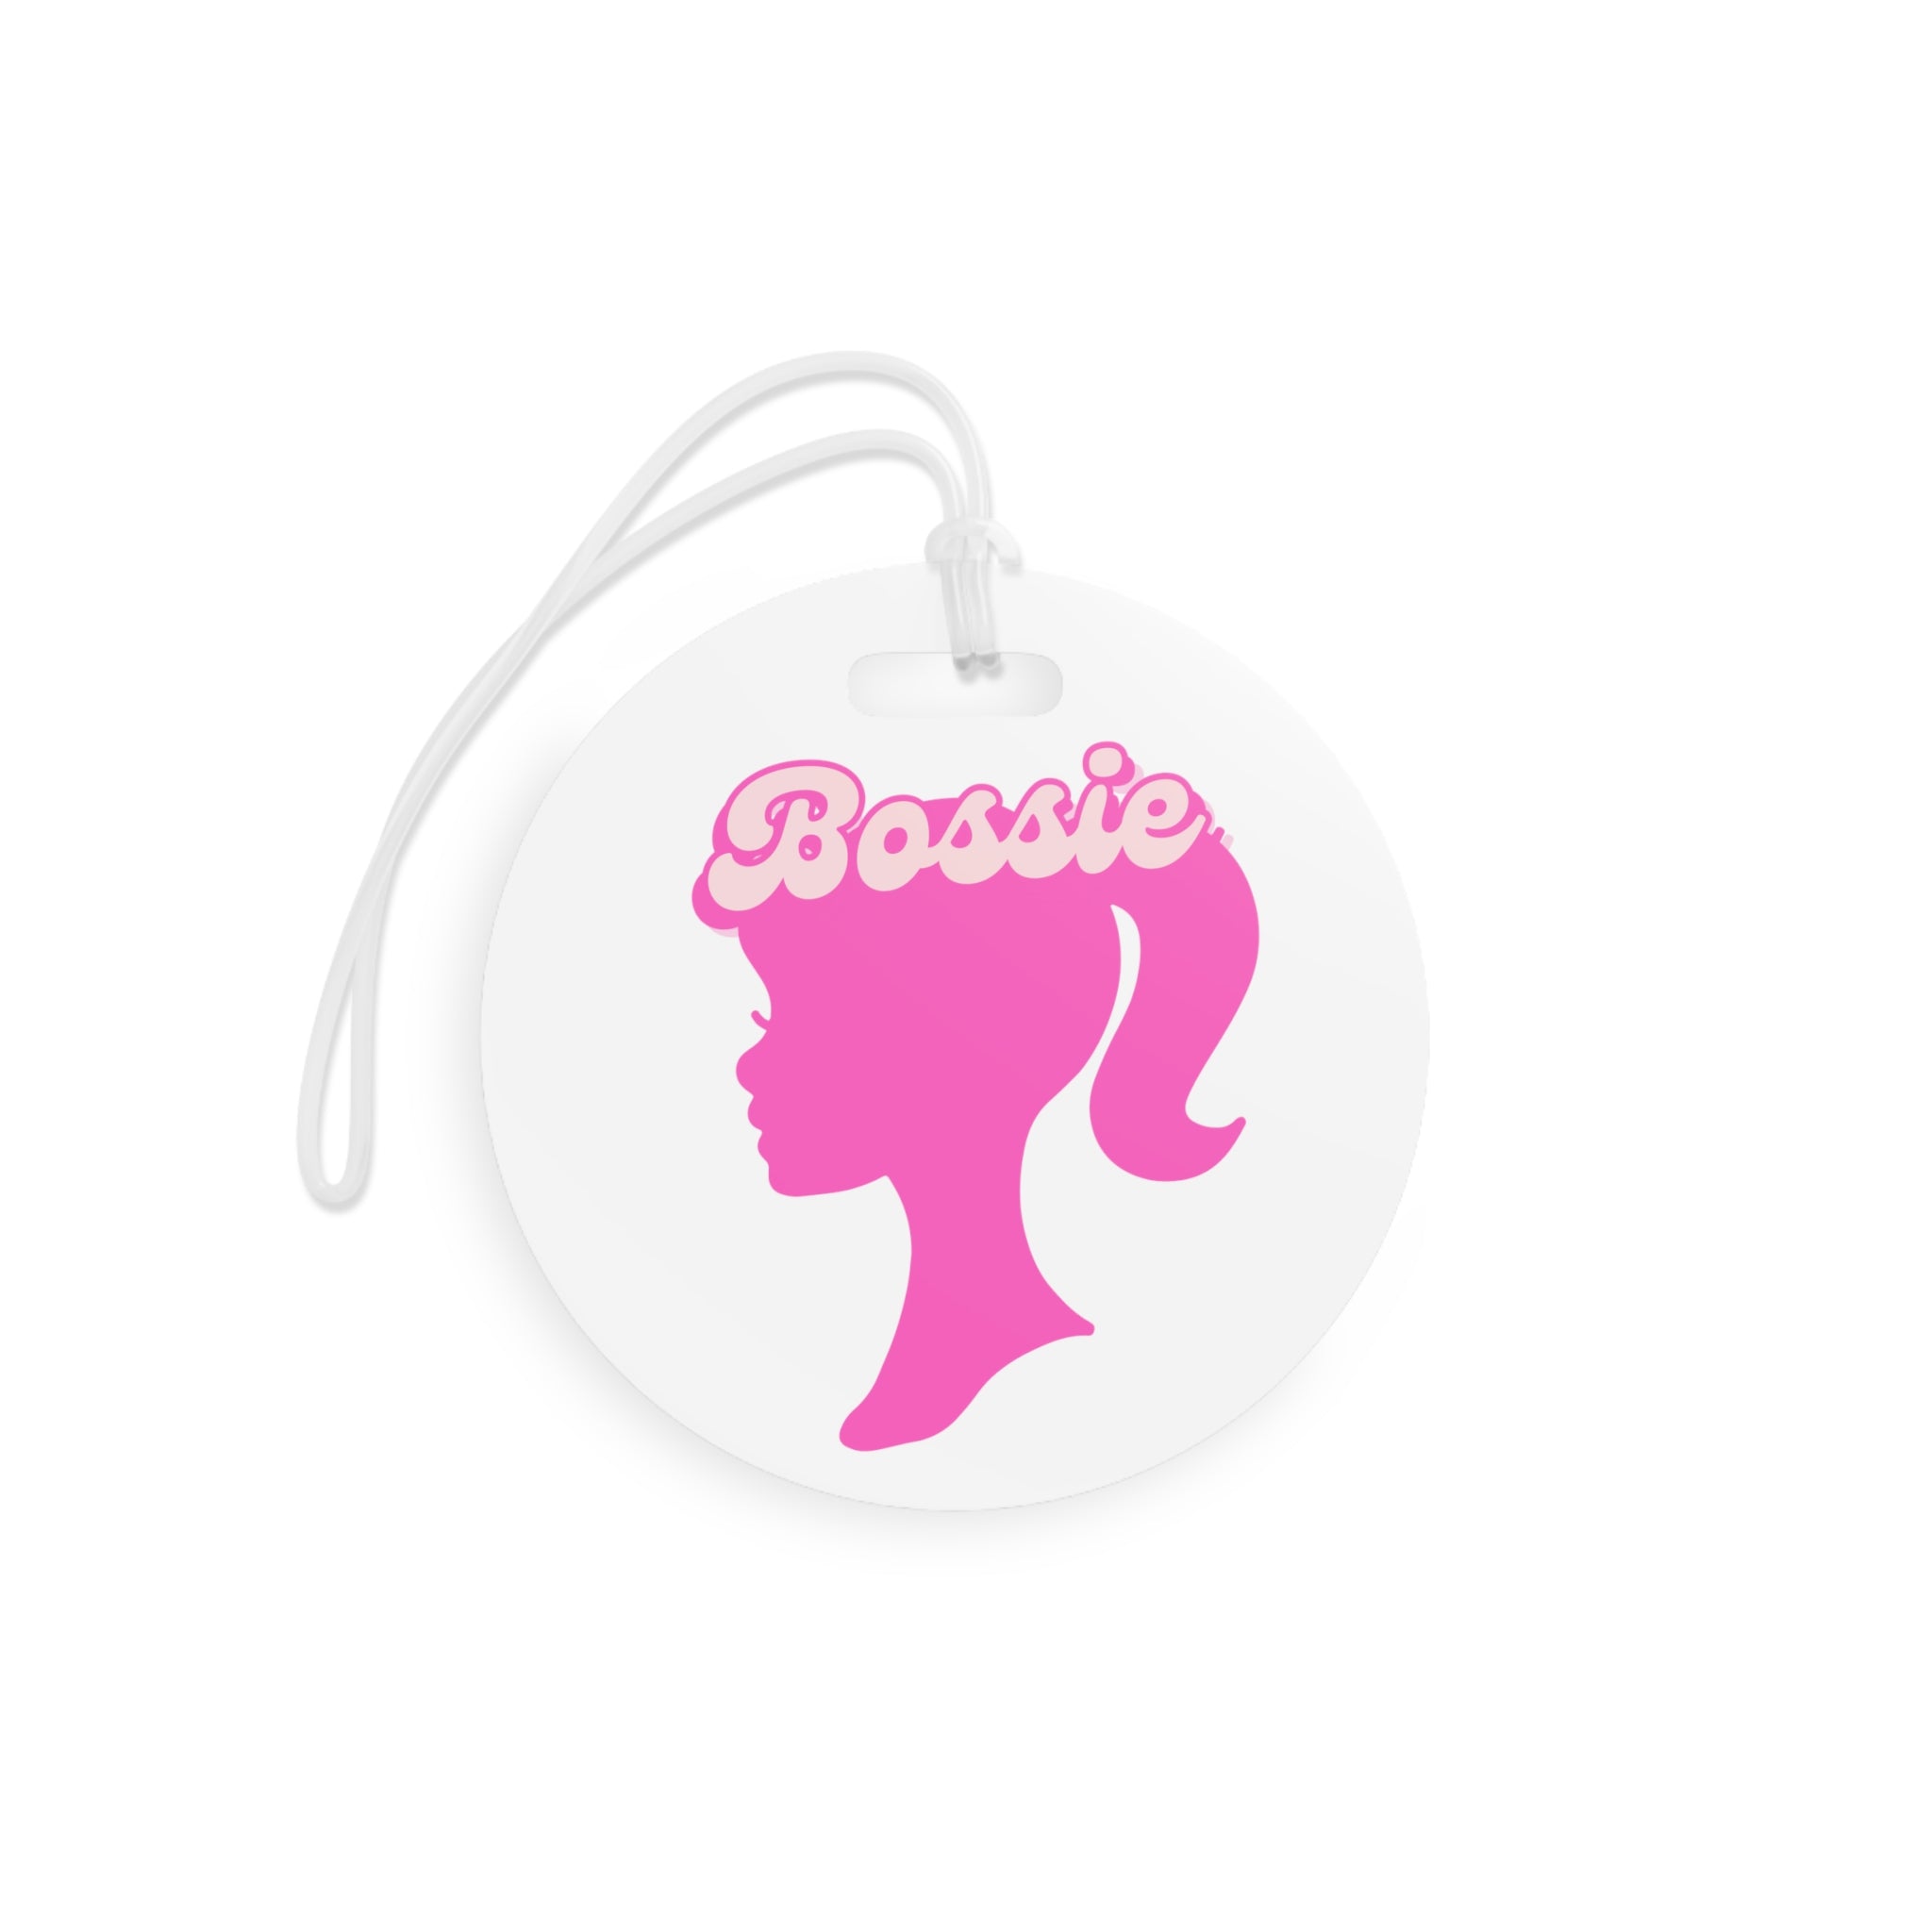  Bossie (Barbie Image) Funny Luggage Tag in white, Barbie Bag Tag, Funny Travel Lover Gift, Gift For Her AccessoriesRoundOnesize